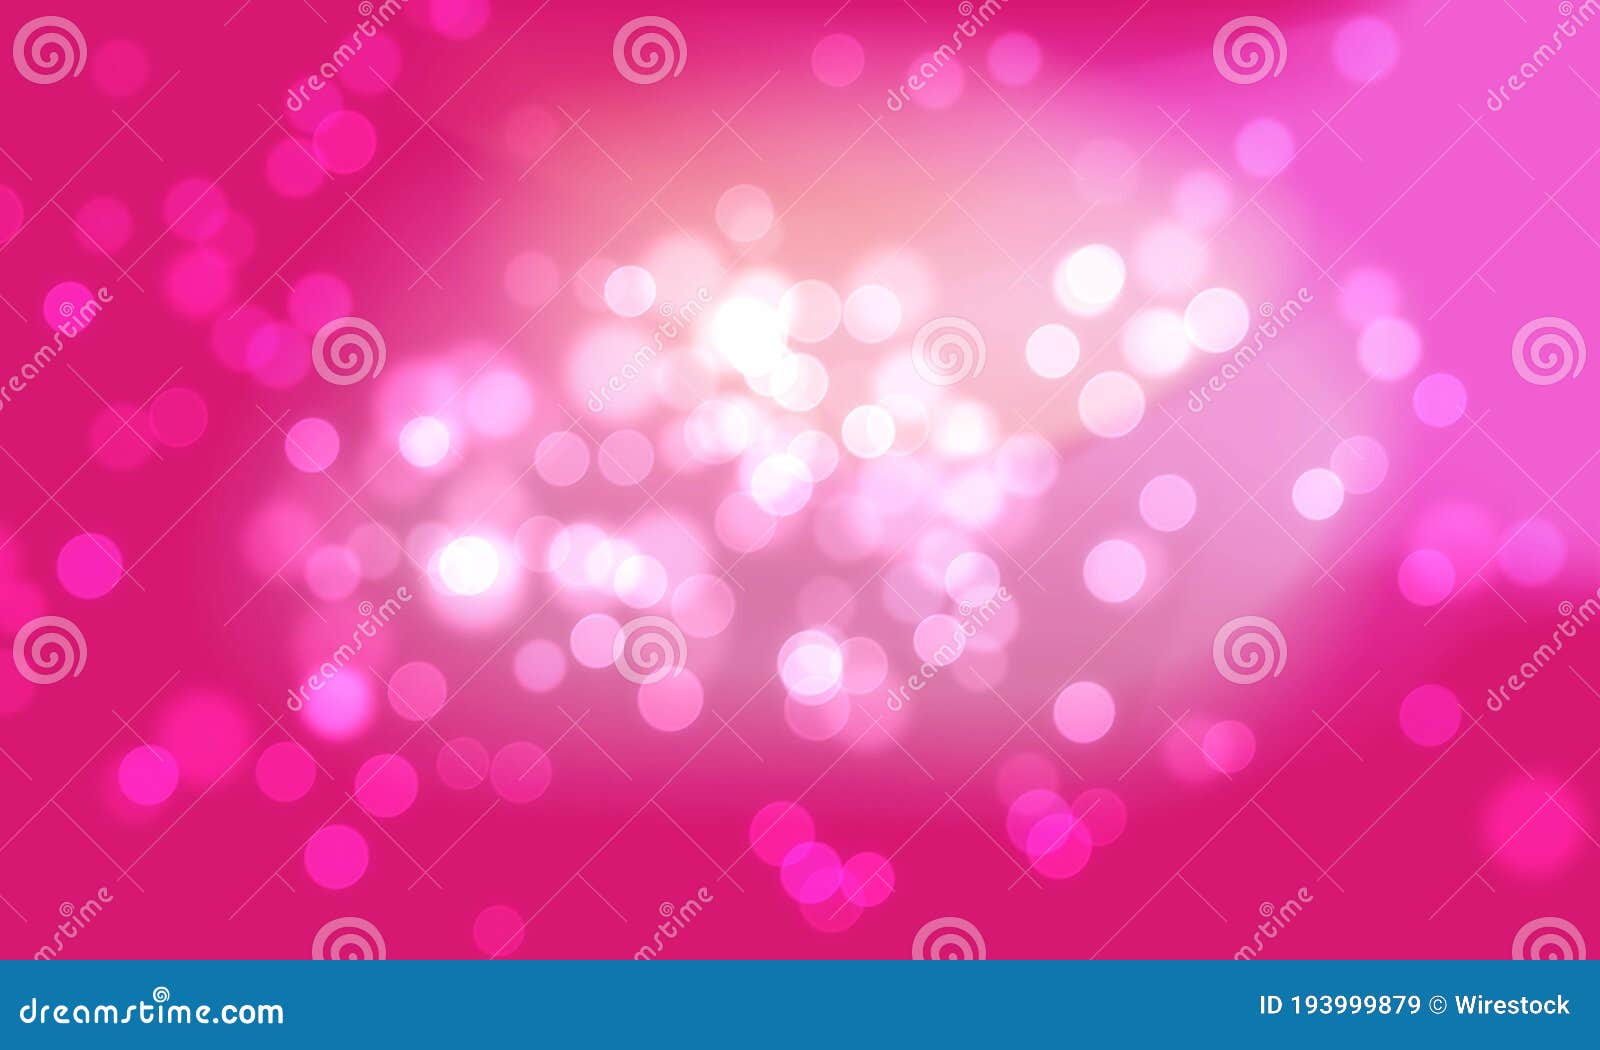 Bright Pink Background with White Bokeh Lights for Wallpapers Stock ...